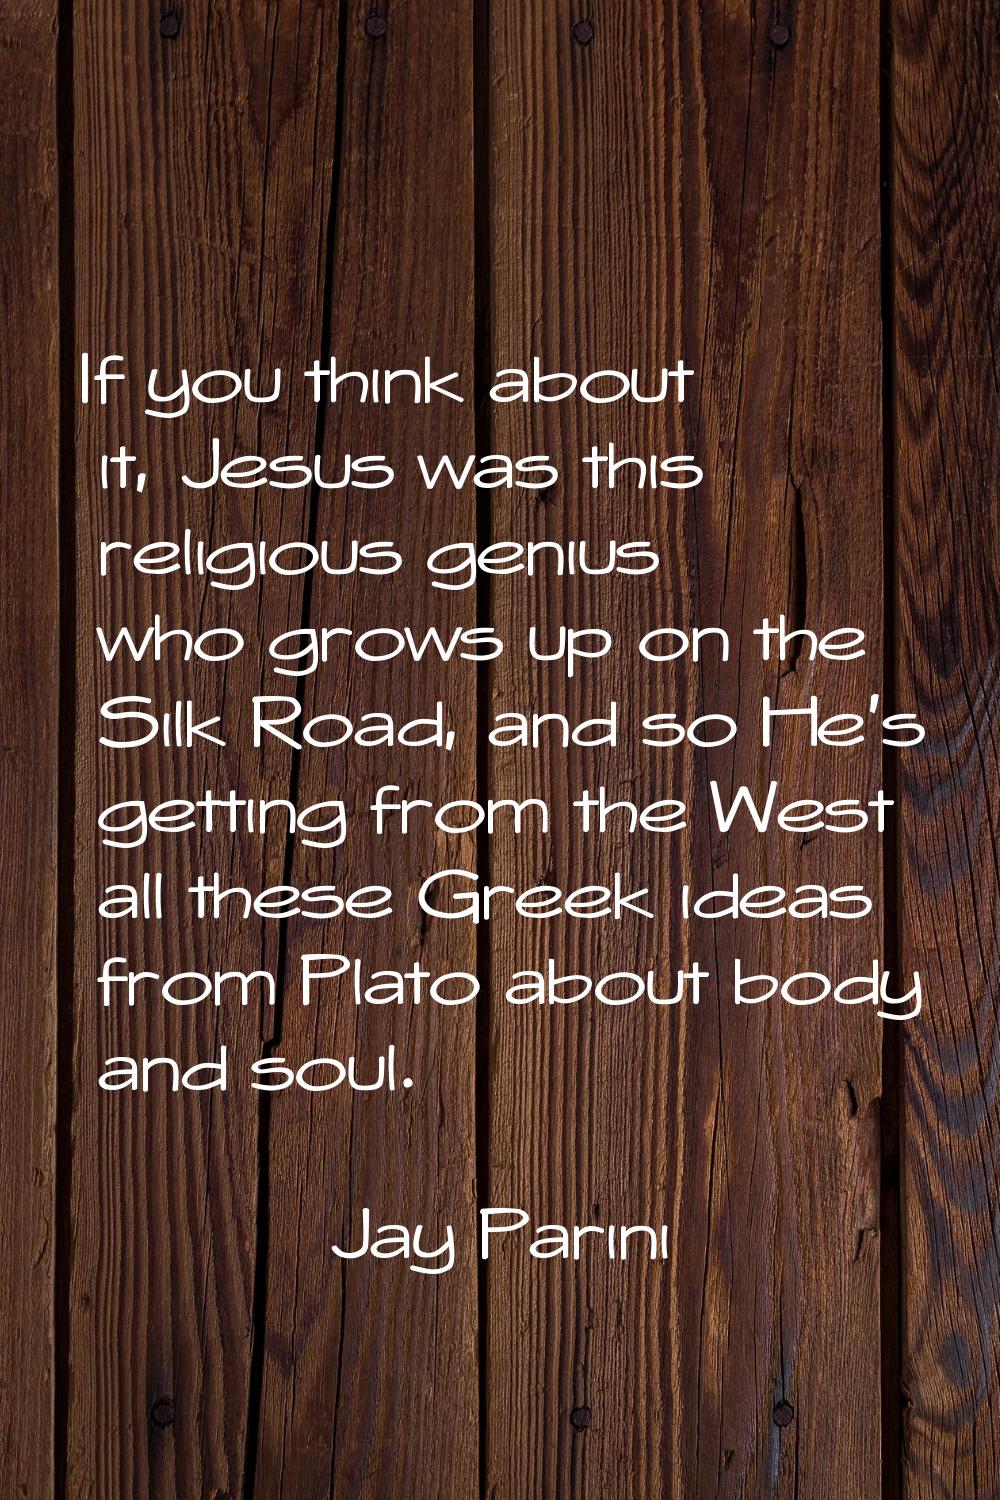 If you think about it, Jesus was this religious genius who grows up on the Silk Road, and so He's g